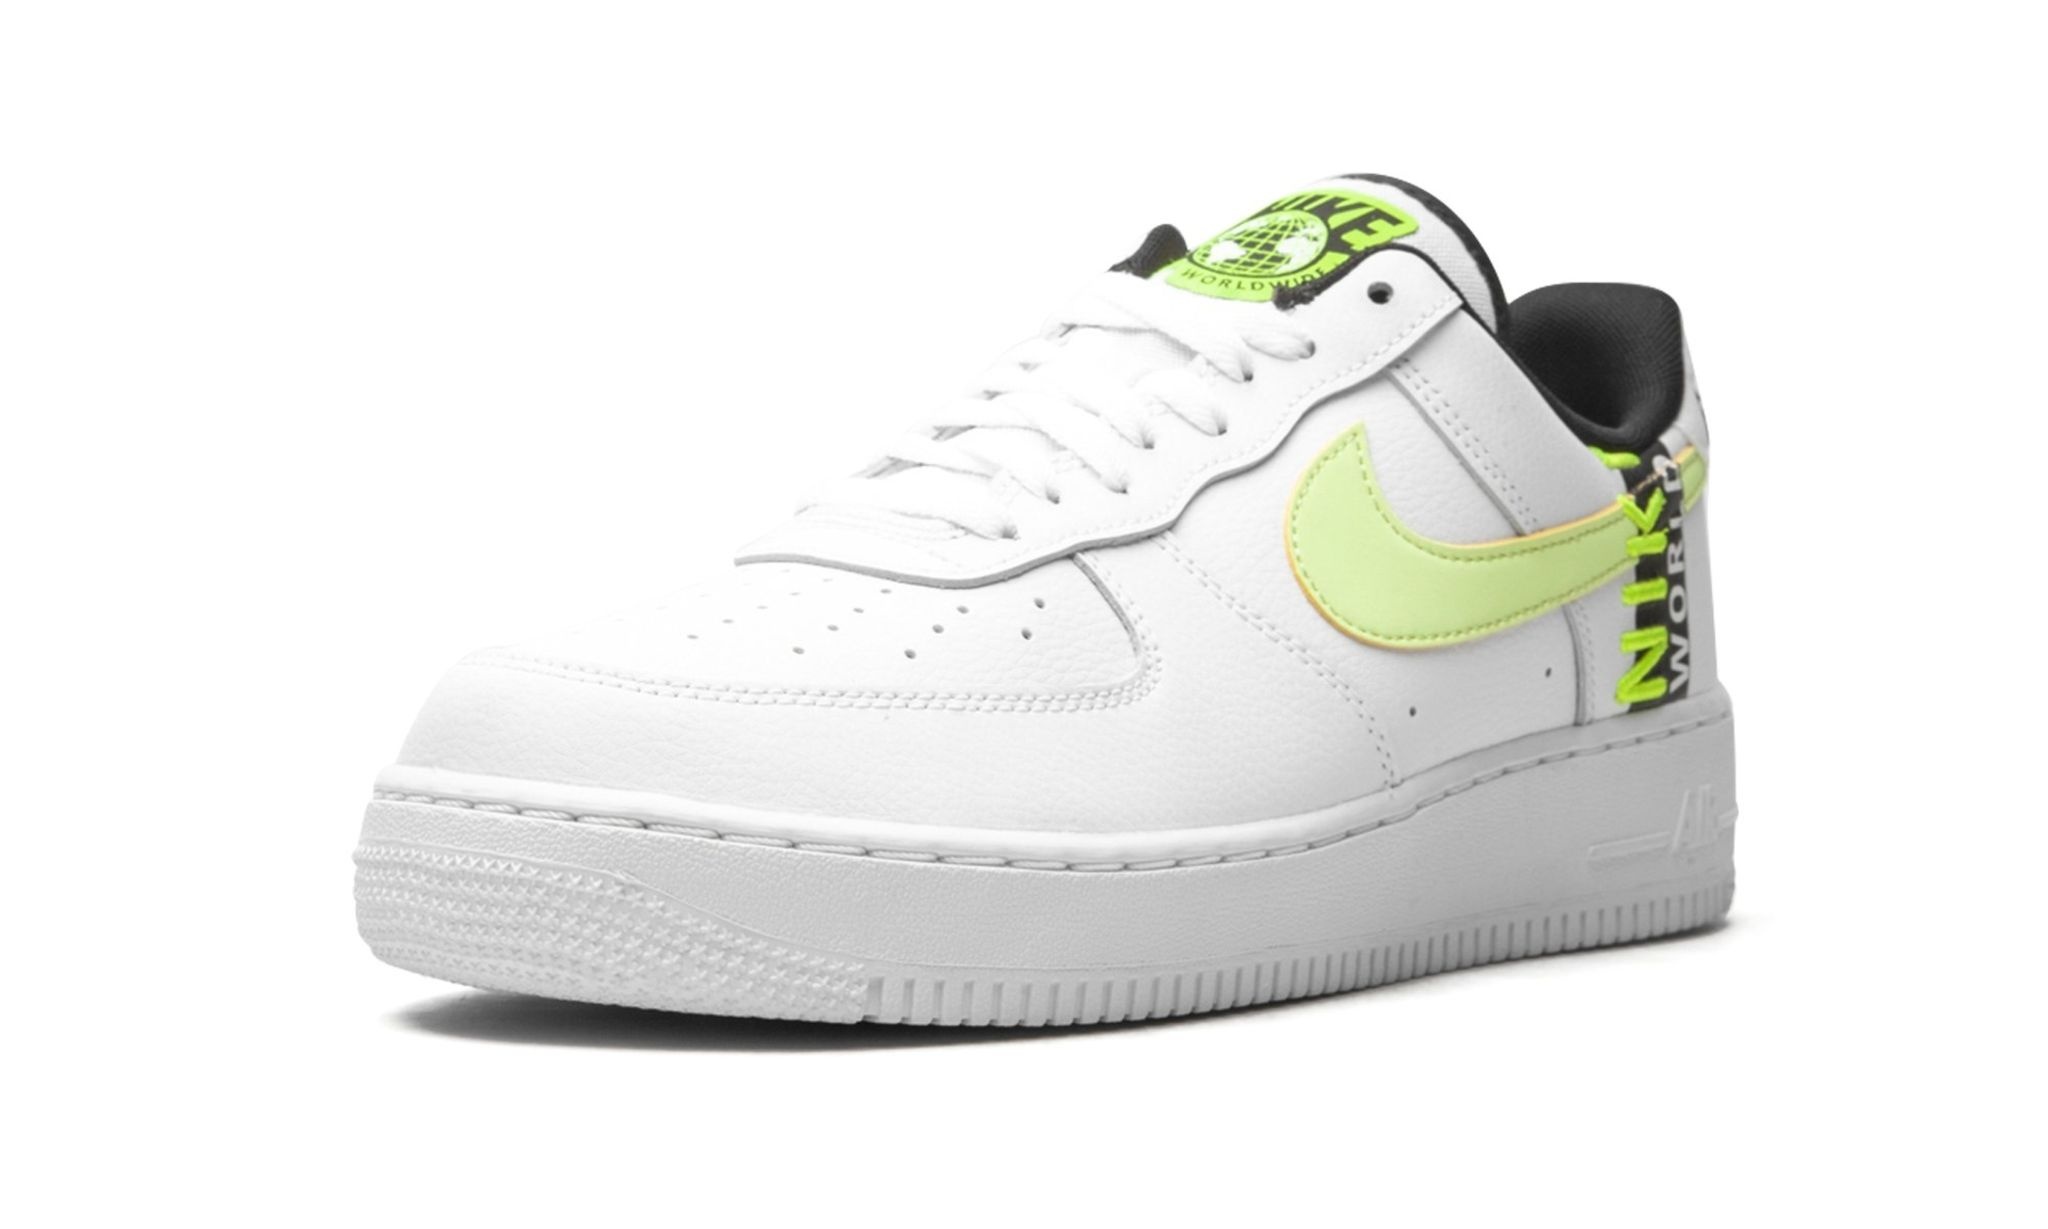 Air Force 1 Low "Worldwide White Volt" - 4